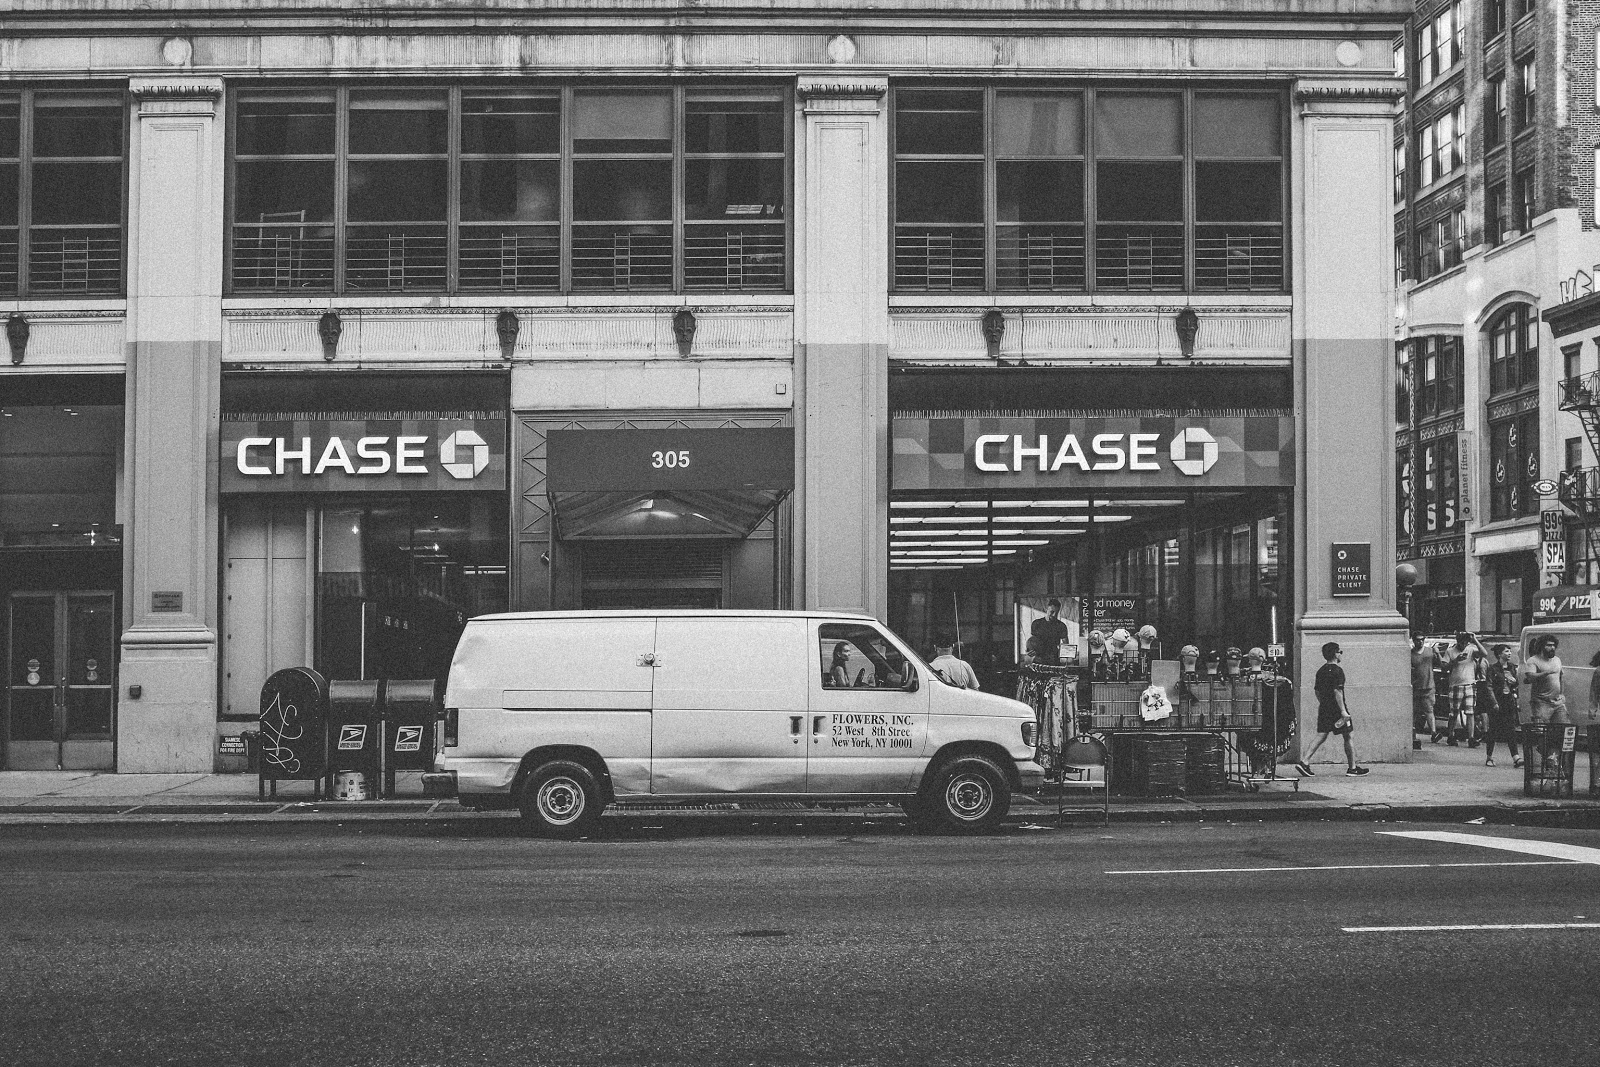 Chase retail bank on a main road with a white van parked out front